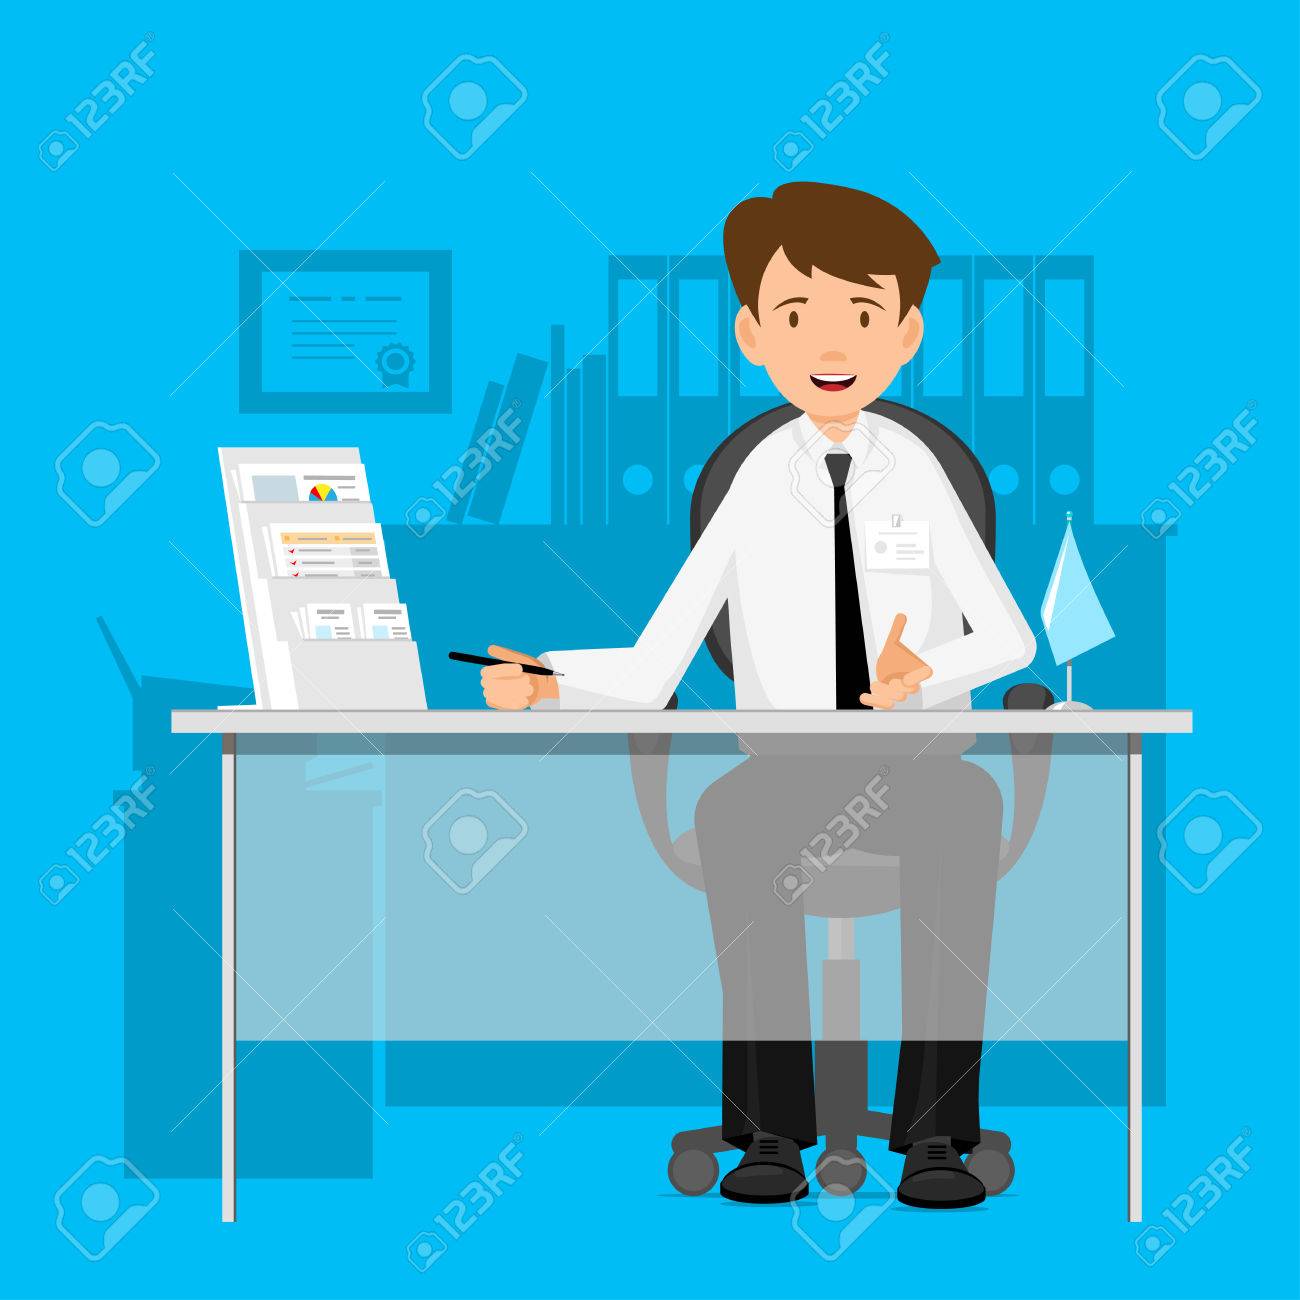 manager clipart technical manager